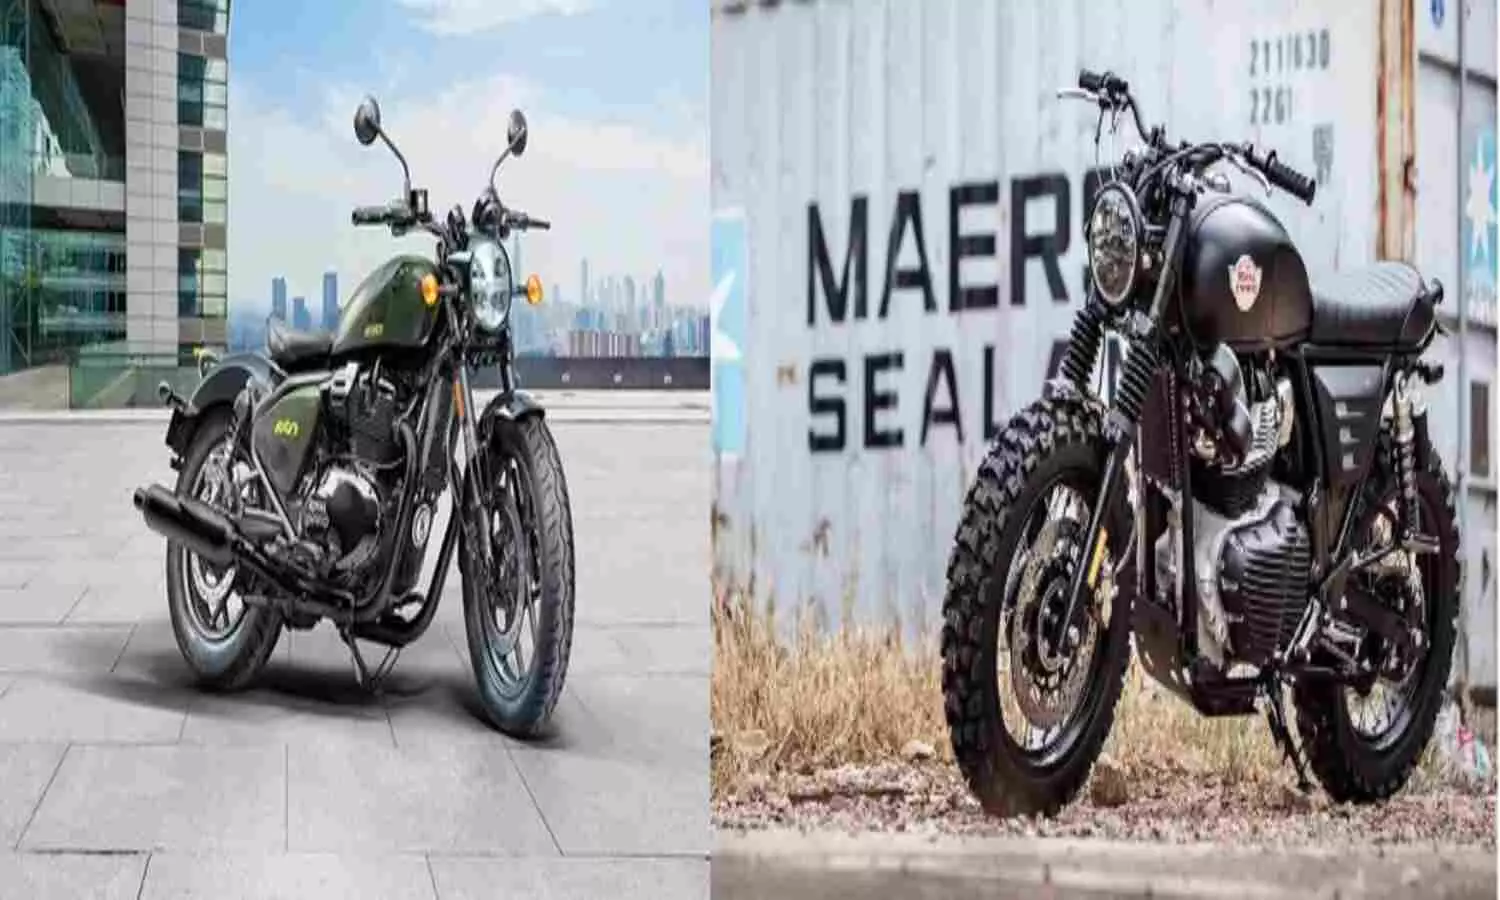 Royal Enfield will launch 5 new bikes